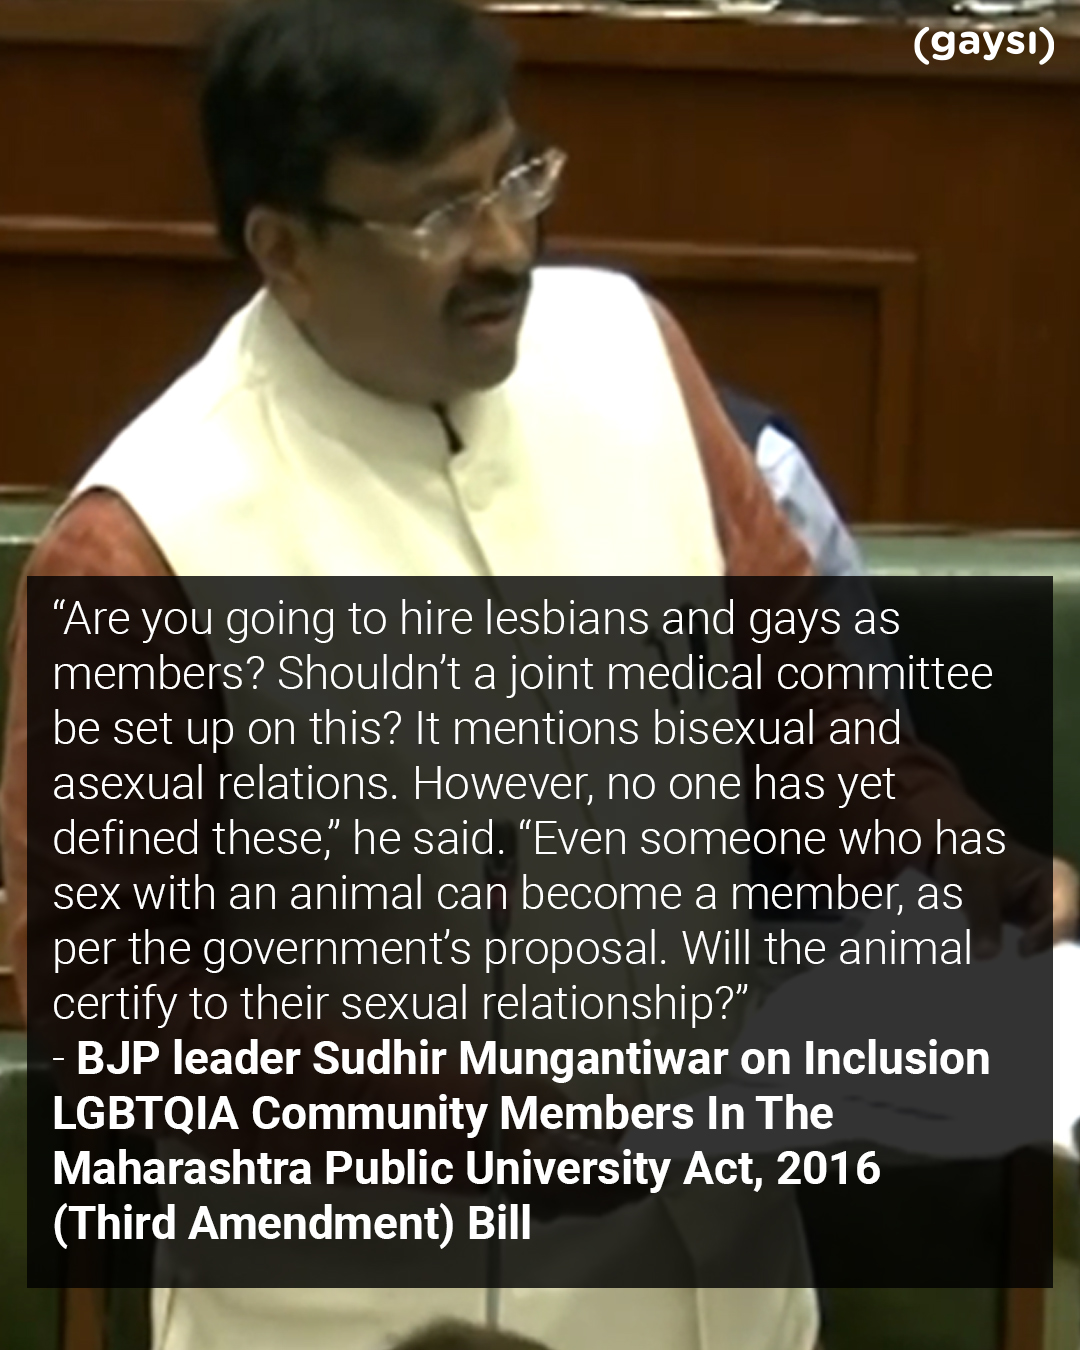 Meet Queerphobic BJP Leader And Former Minister Sudhir Mungantiwar And Listen To His Views On Inclusion LGBTQIA Community Members In The Maharashtra Public University Act, 2016 (Third Amendment) Bill